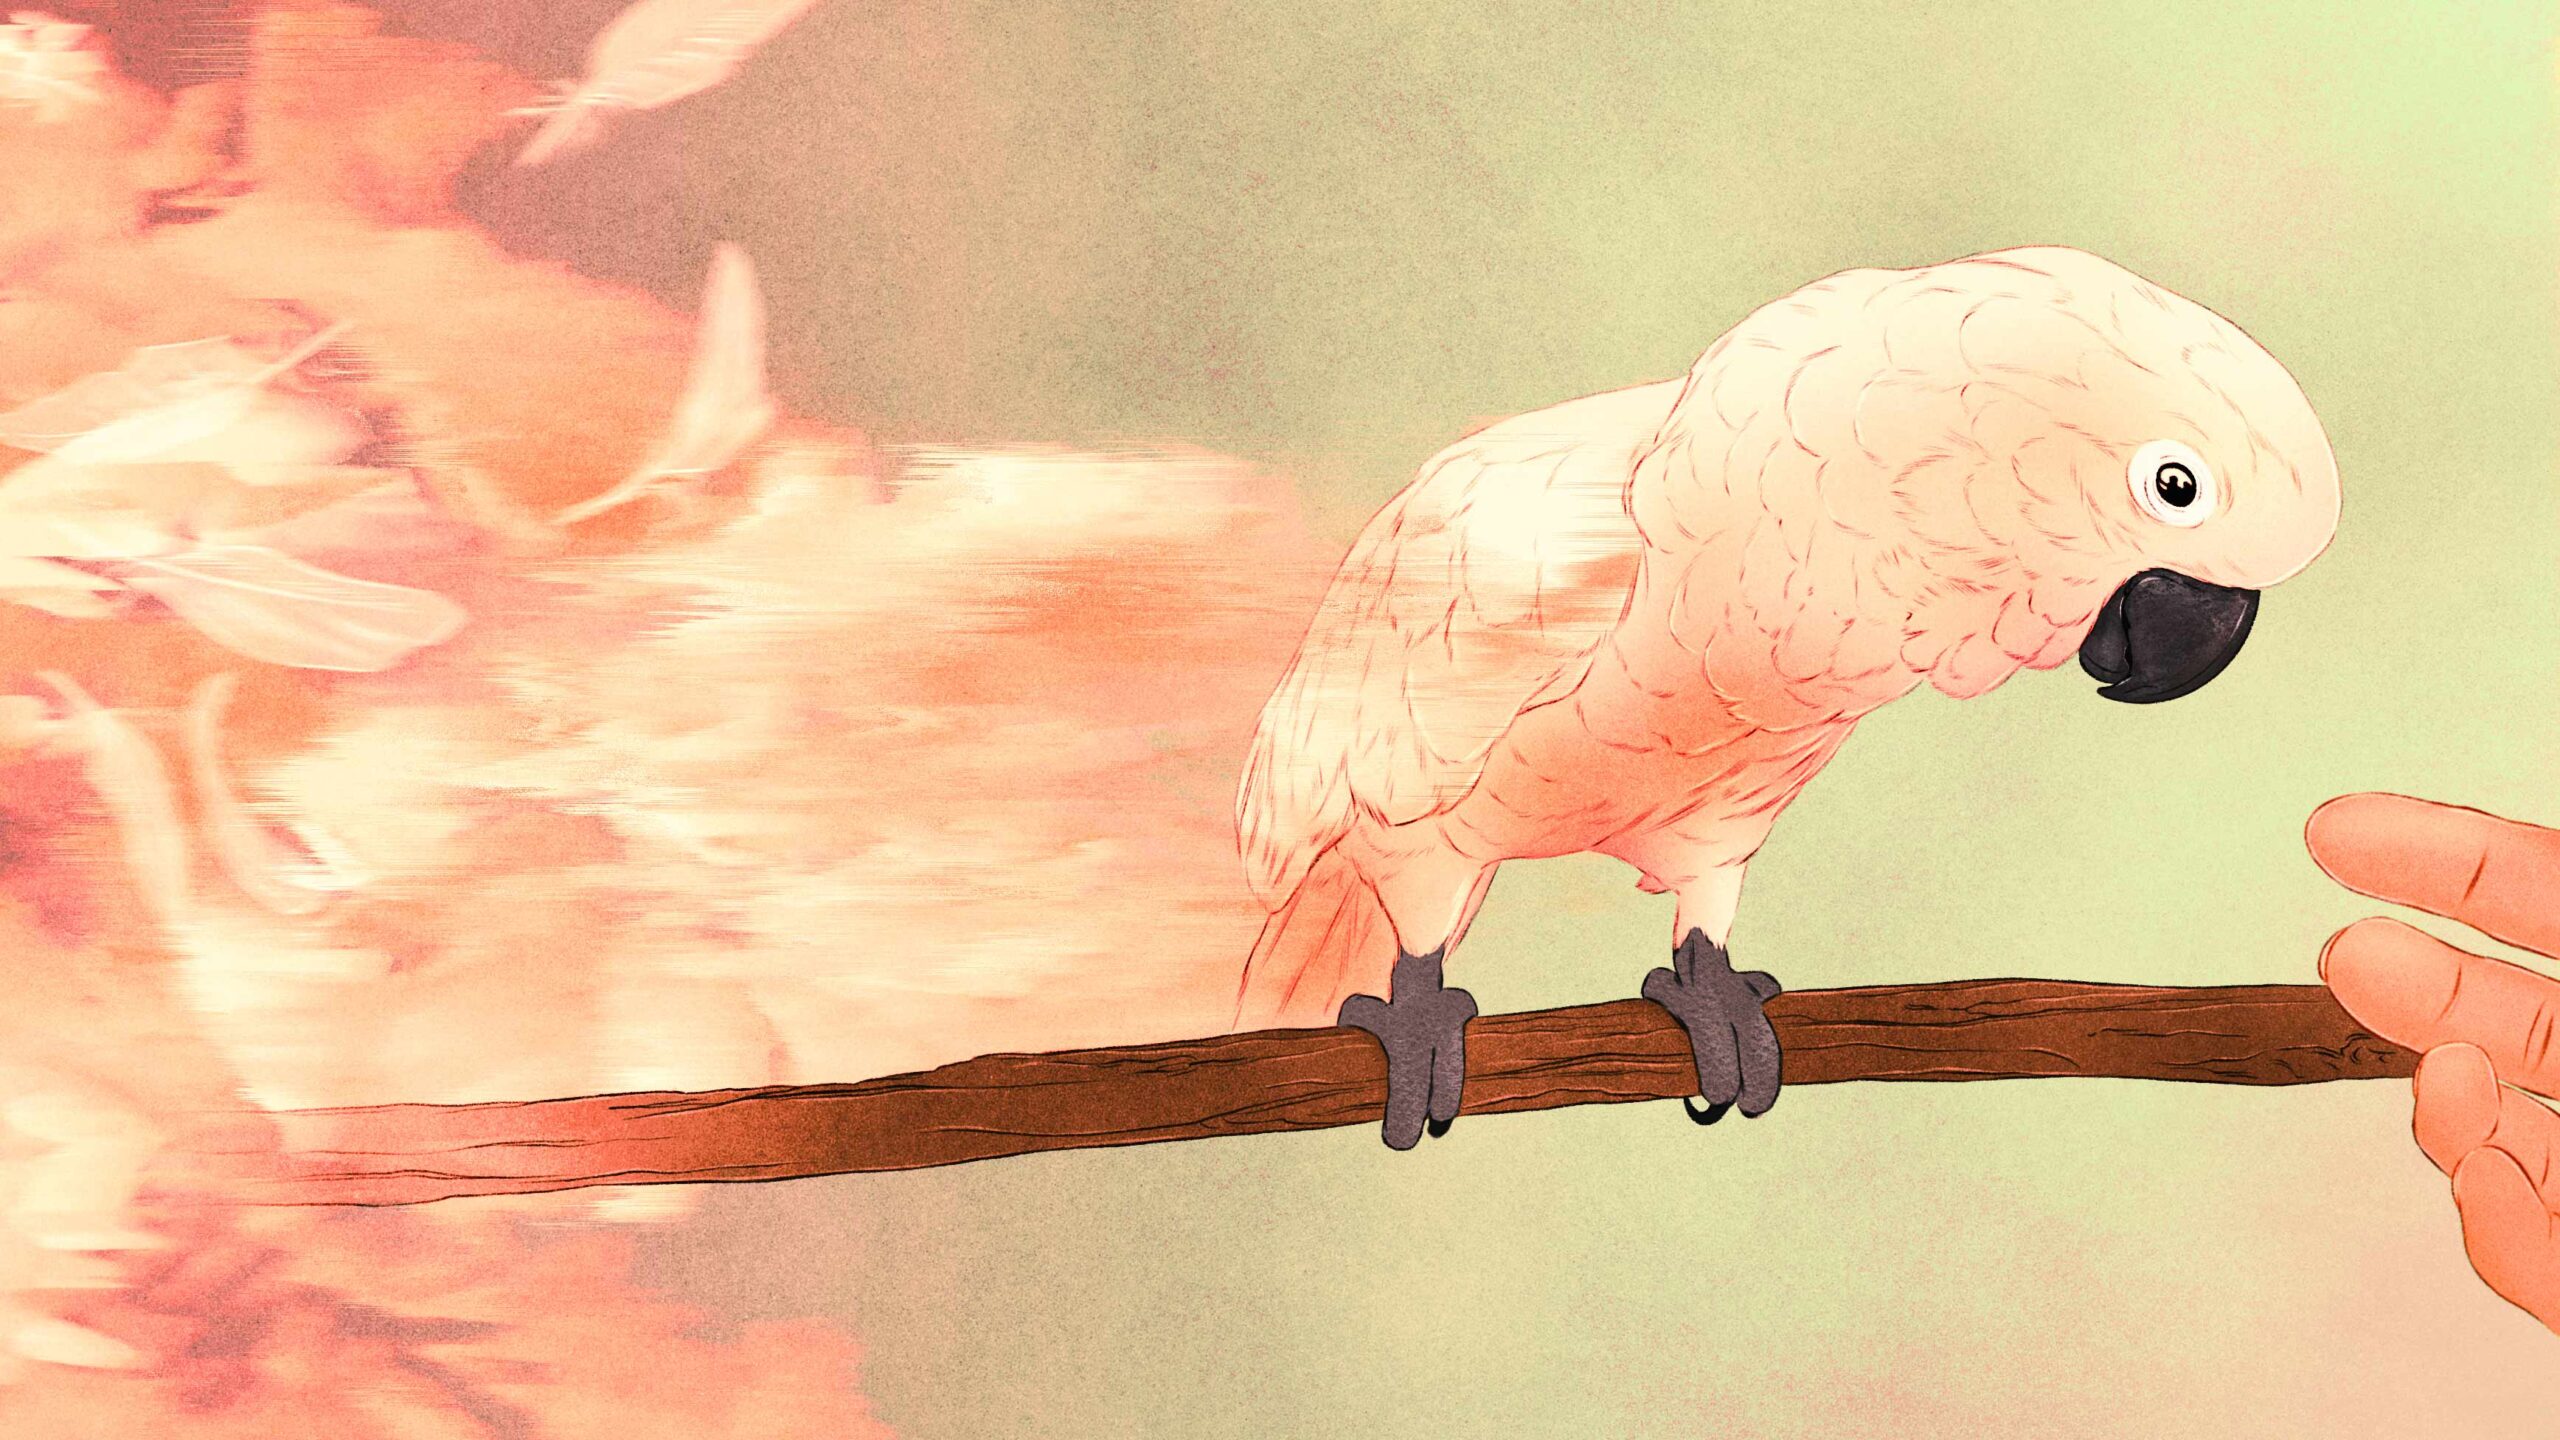 White Moluccan cockatoo on a branch turning toward a person's hand. Reddish flames are behind the bird to symbolize past trauma. Illustrated.